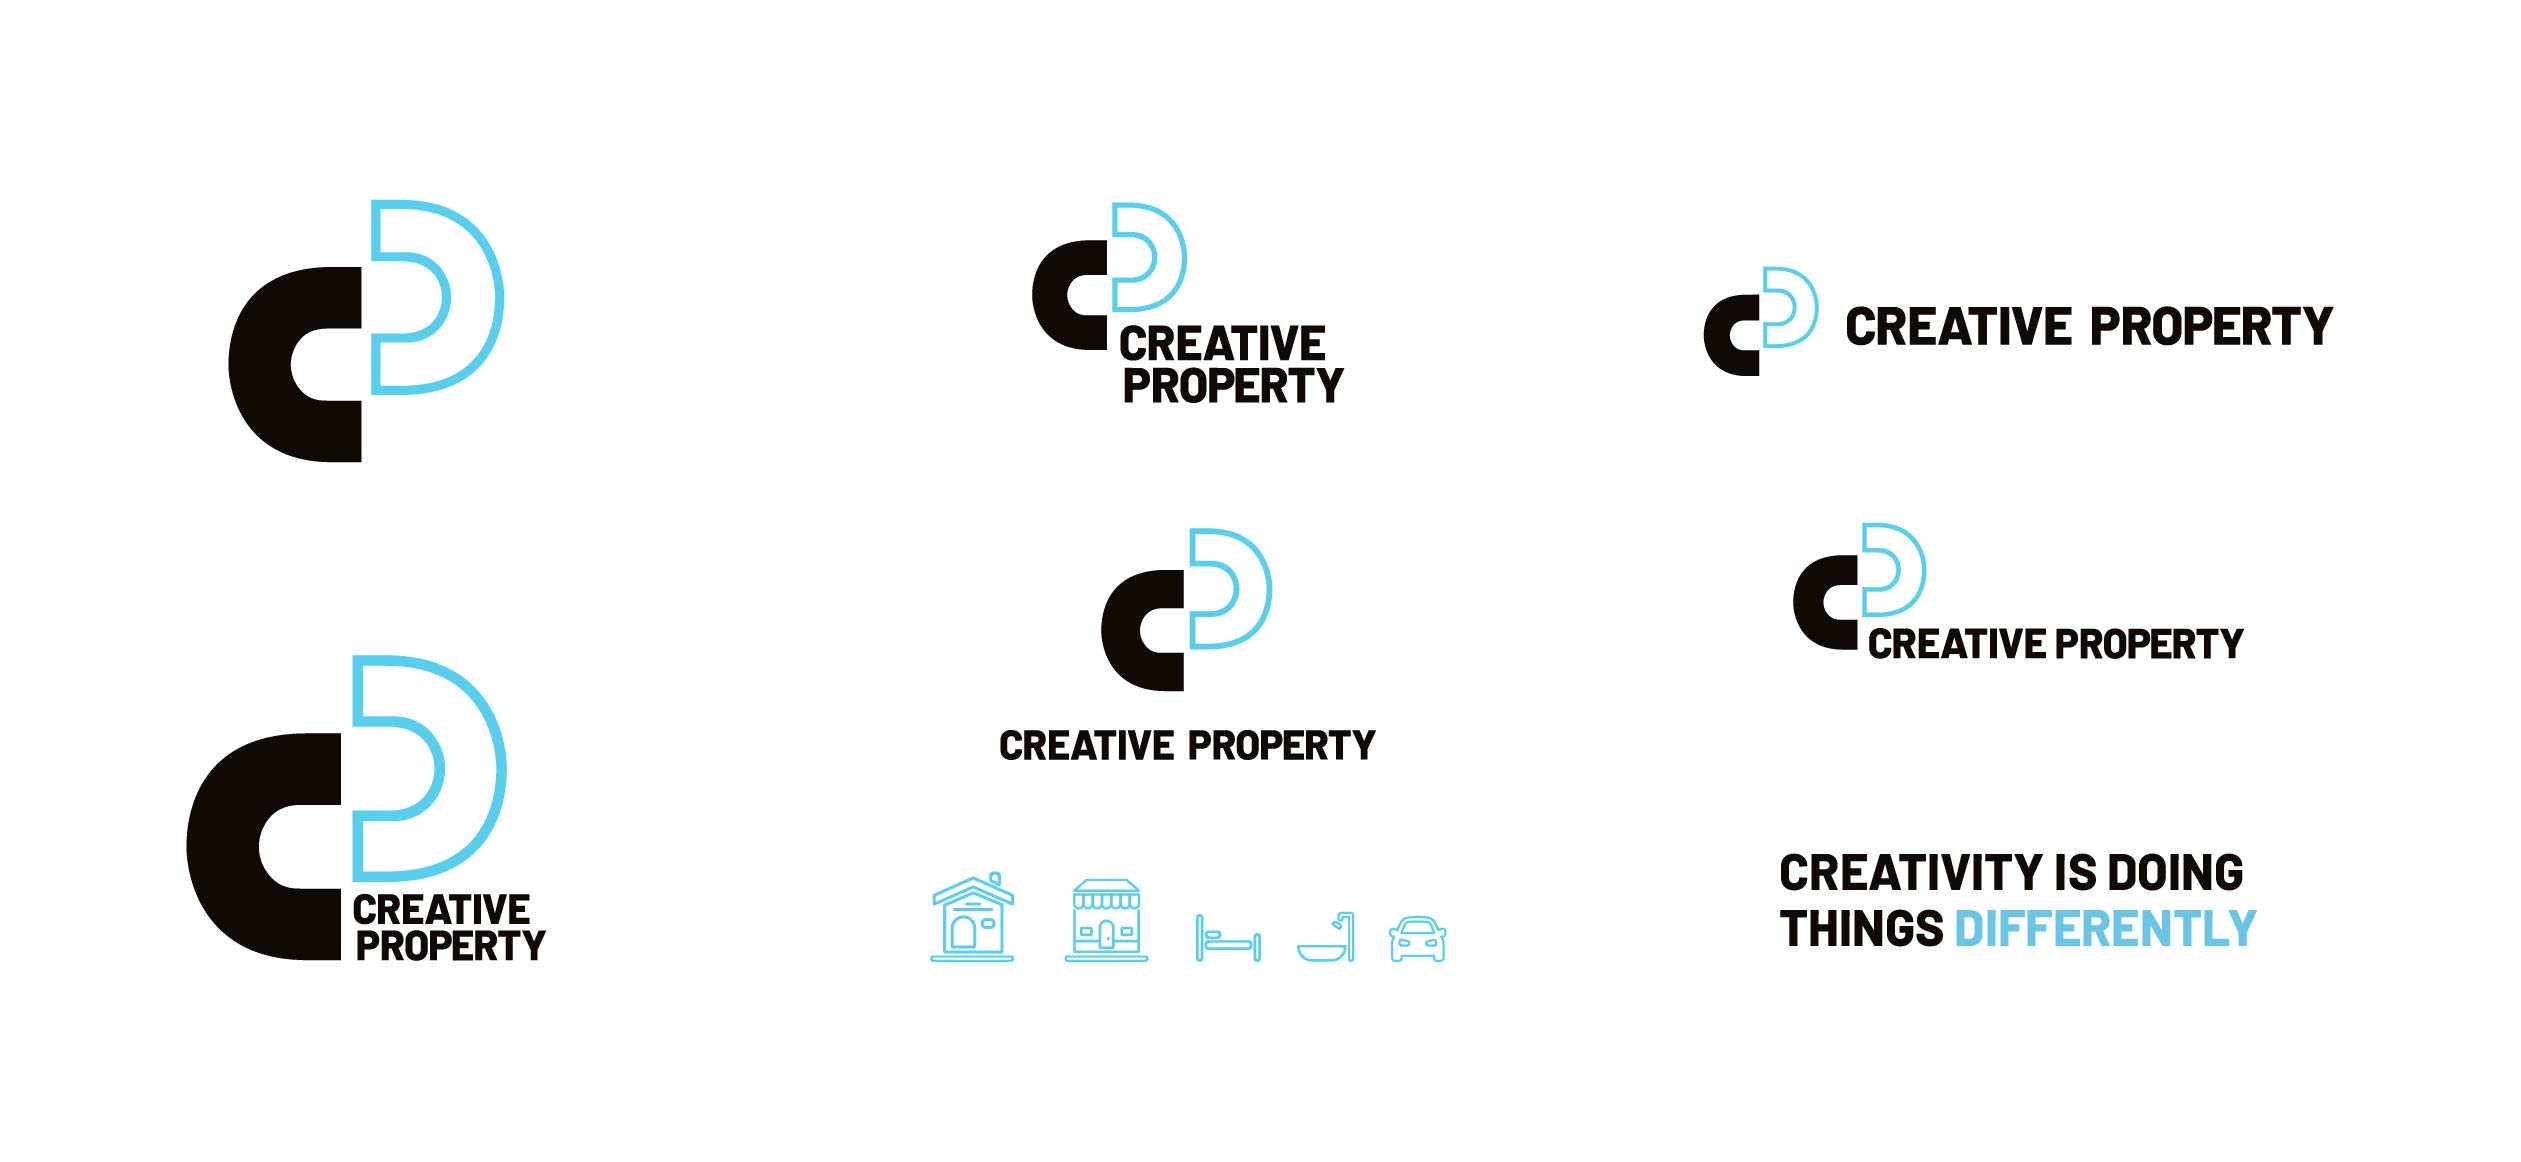 NEW_Creative_Property_Website_Case_Study_Working-19